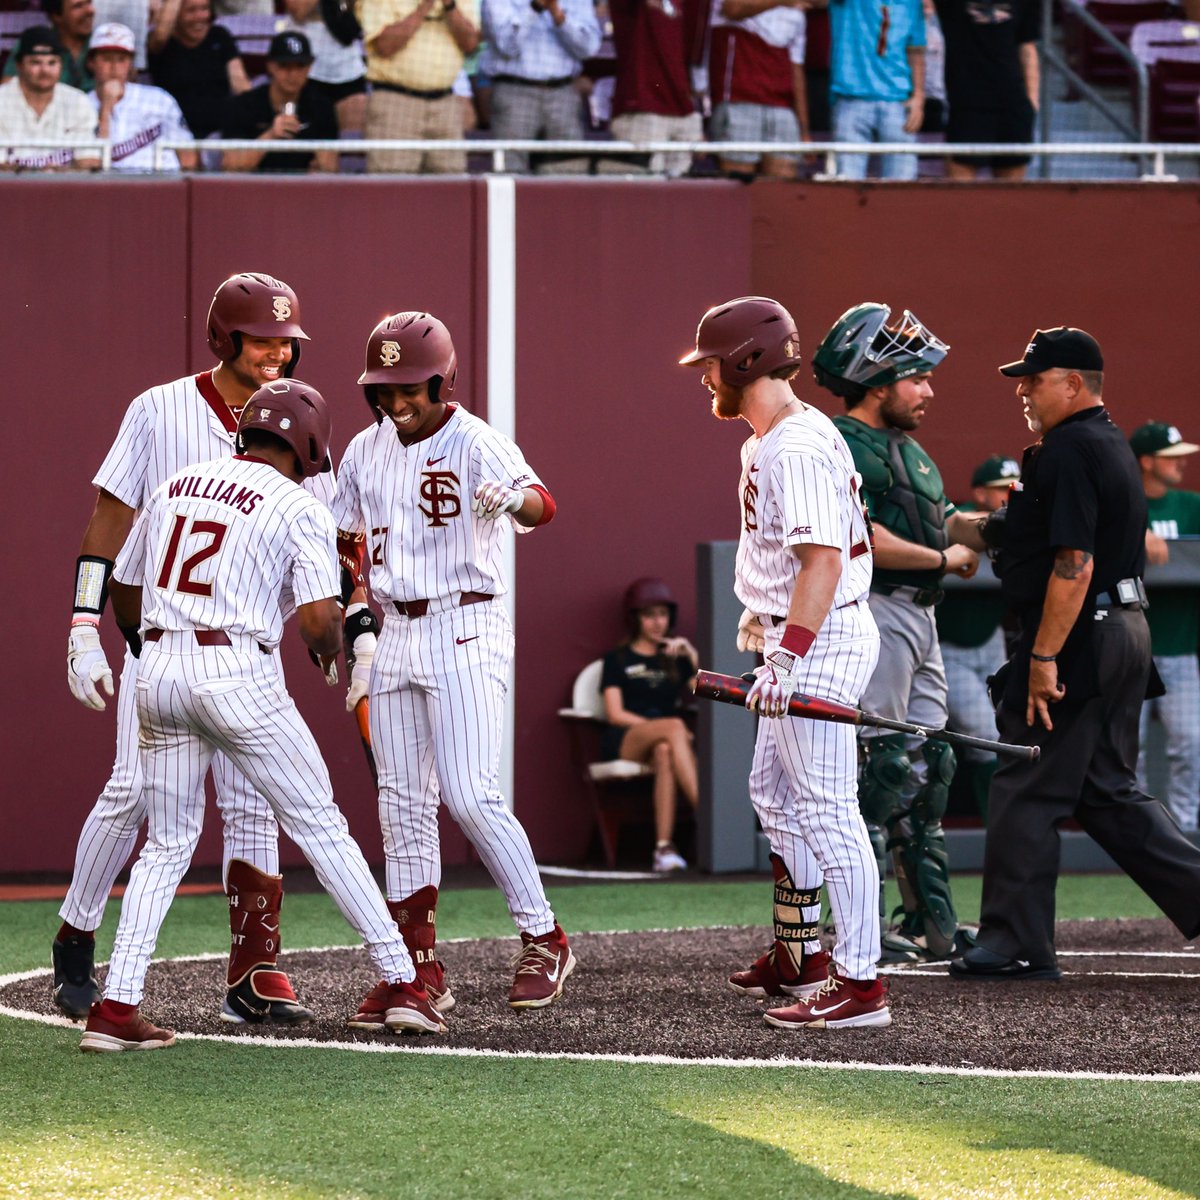 𝑷𝒐𝒔𝒕𝒔𝒆𝒂𝒔𝒐𝒏 𝑩𝒂𝒔𝒆𝒃𝒂𝒍𝒍 ⚾️ 😍 Good luck to @FSUBaseball as they begin their ACC title quest today against Georgia Tech at 3PM! Catch the game on the @accnetwork 📺 #OneTribe | #GoNoles